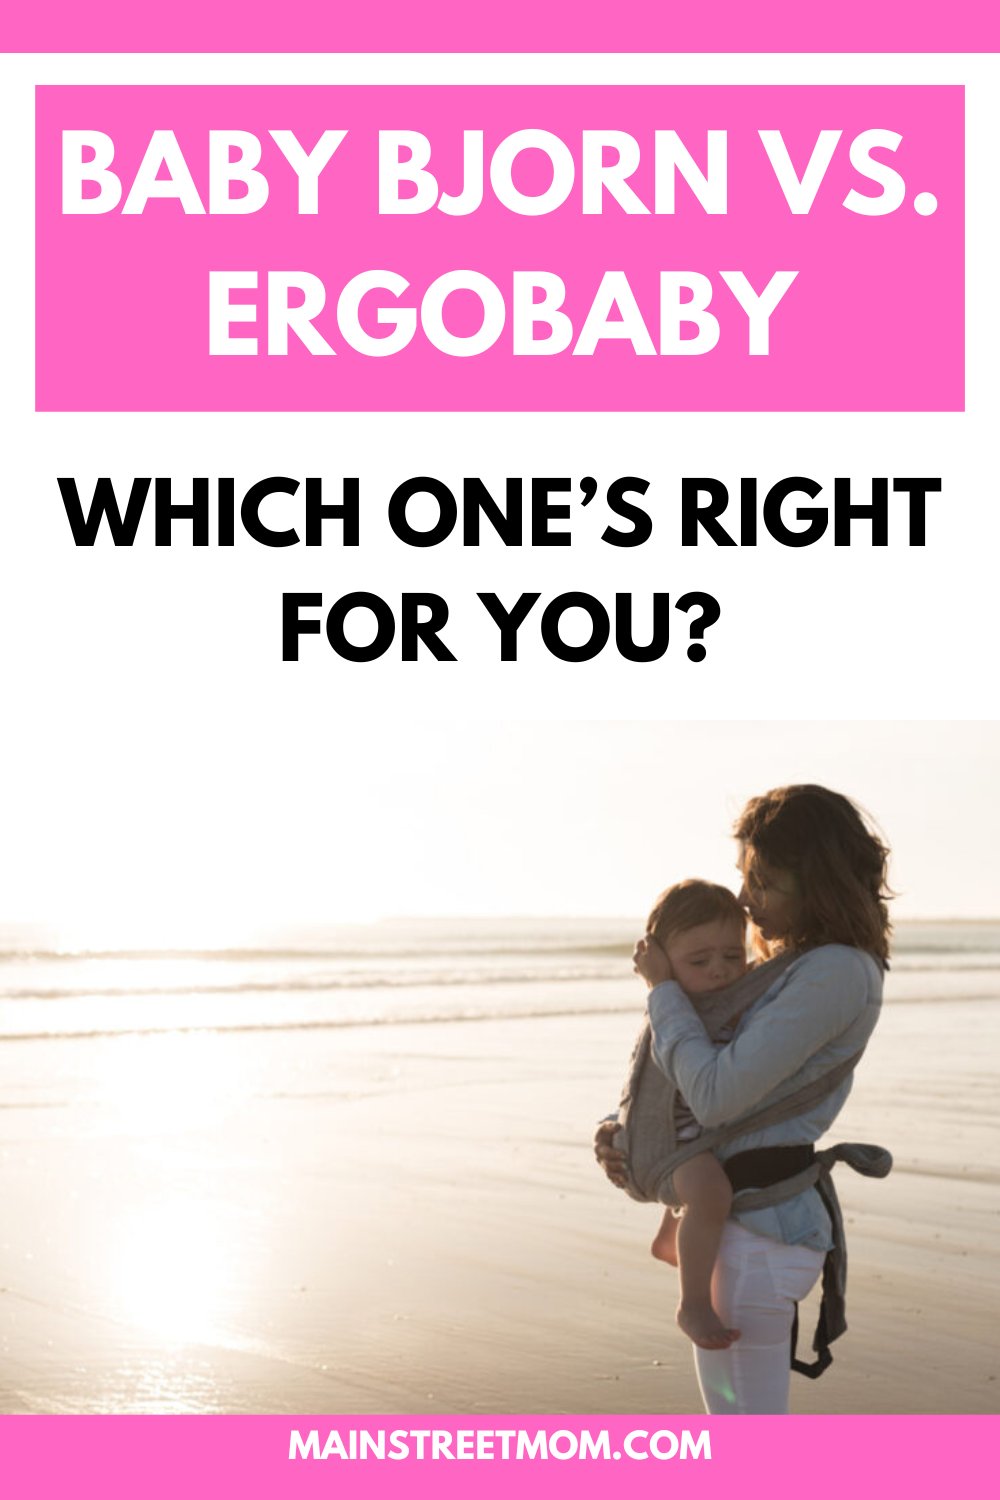 Baby Bjorn Vs. Ergobaby: Which One’s Right For You?
